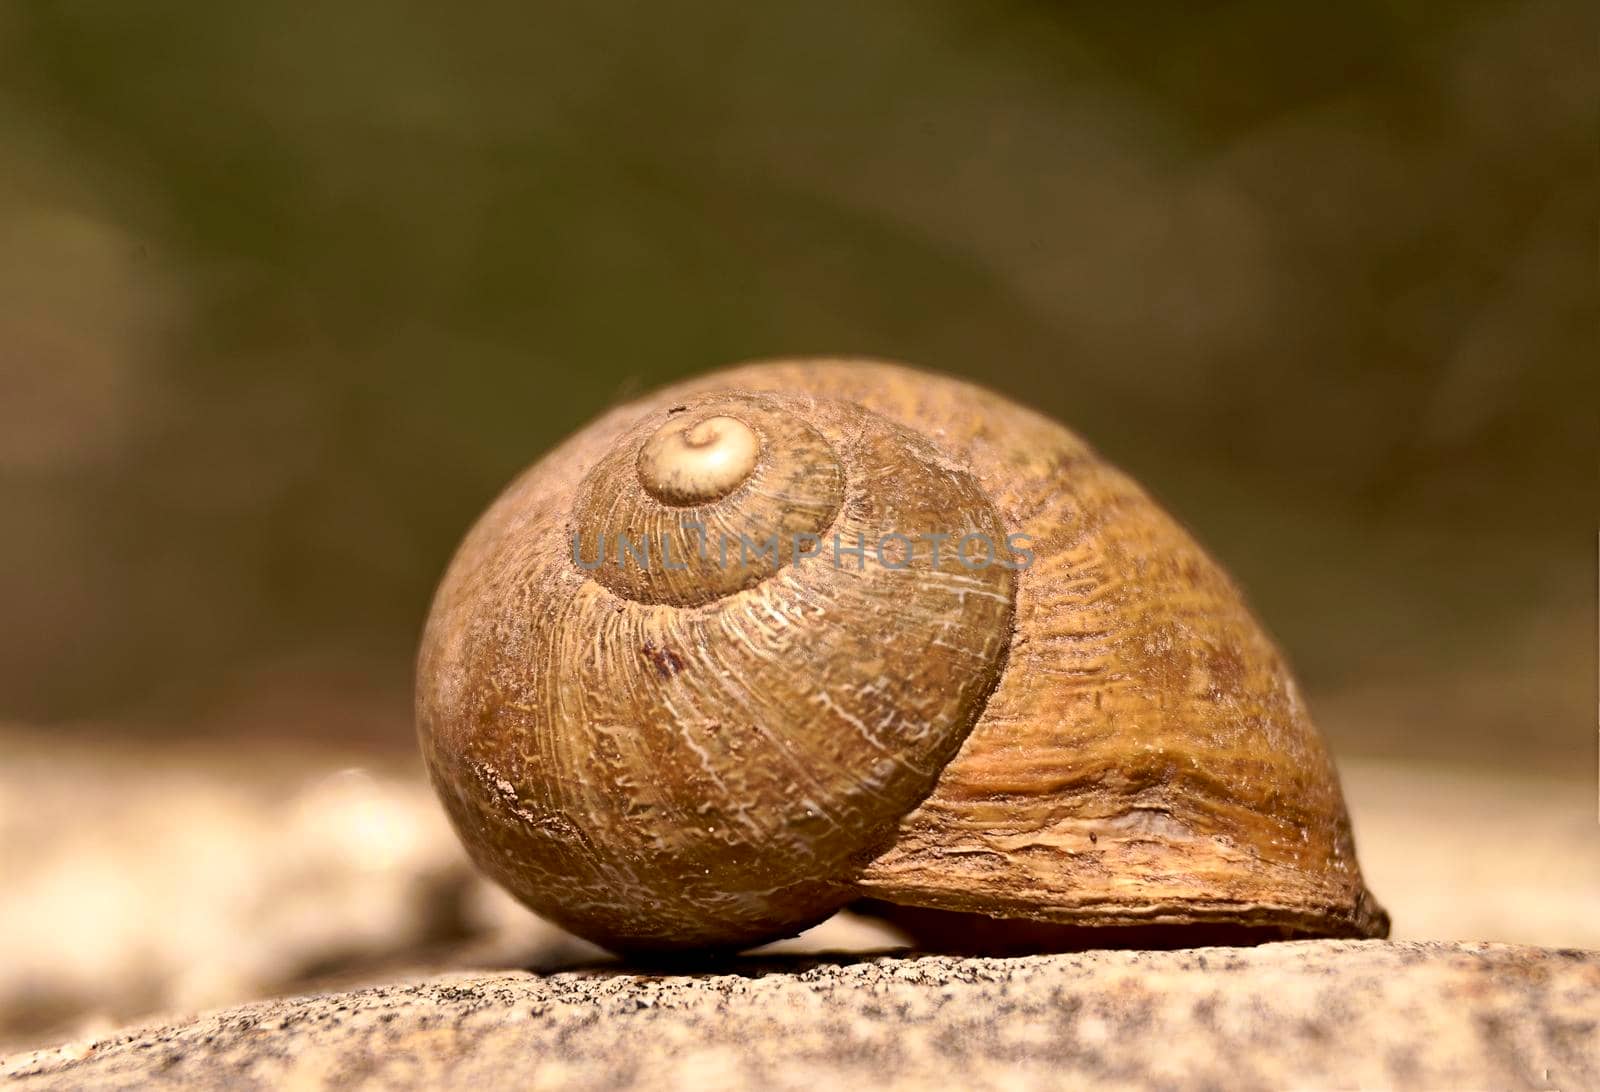 Snail on grey stone on a blurred background. Free space, vegetation, macro photography.